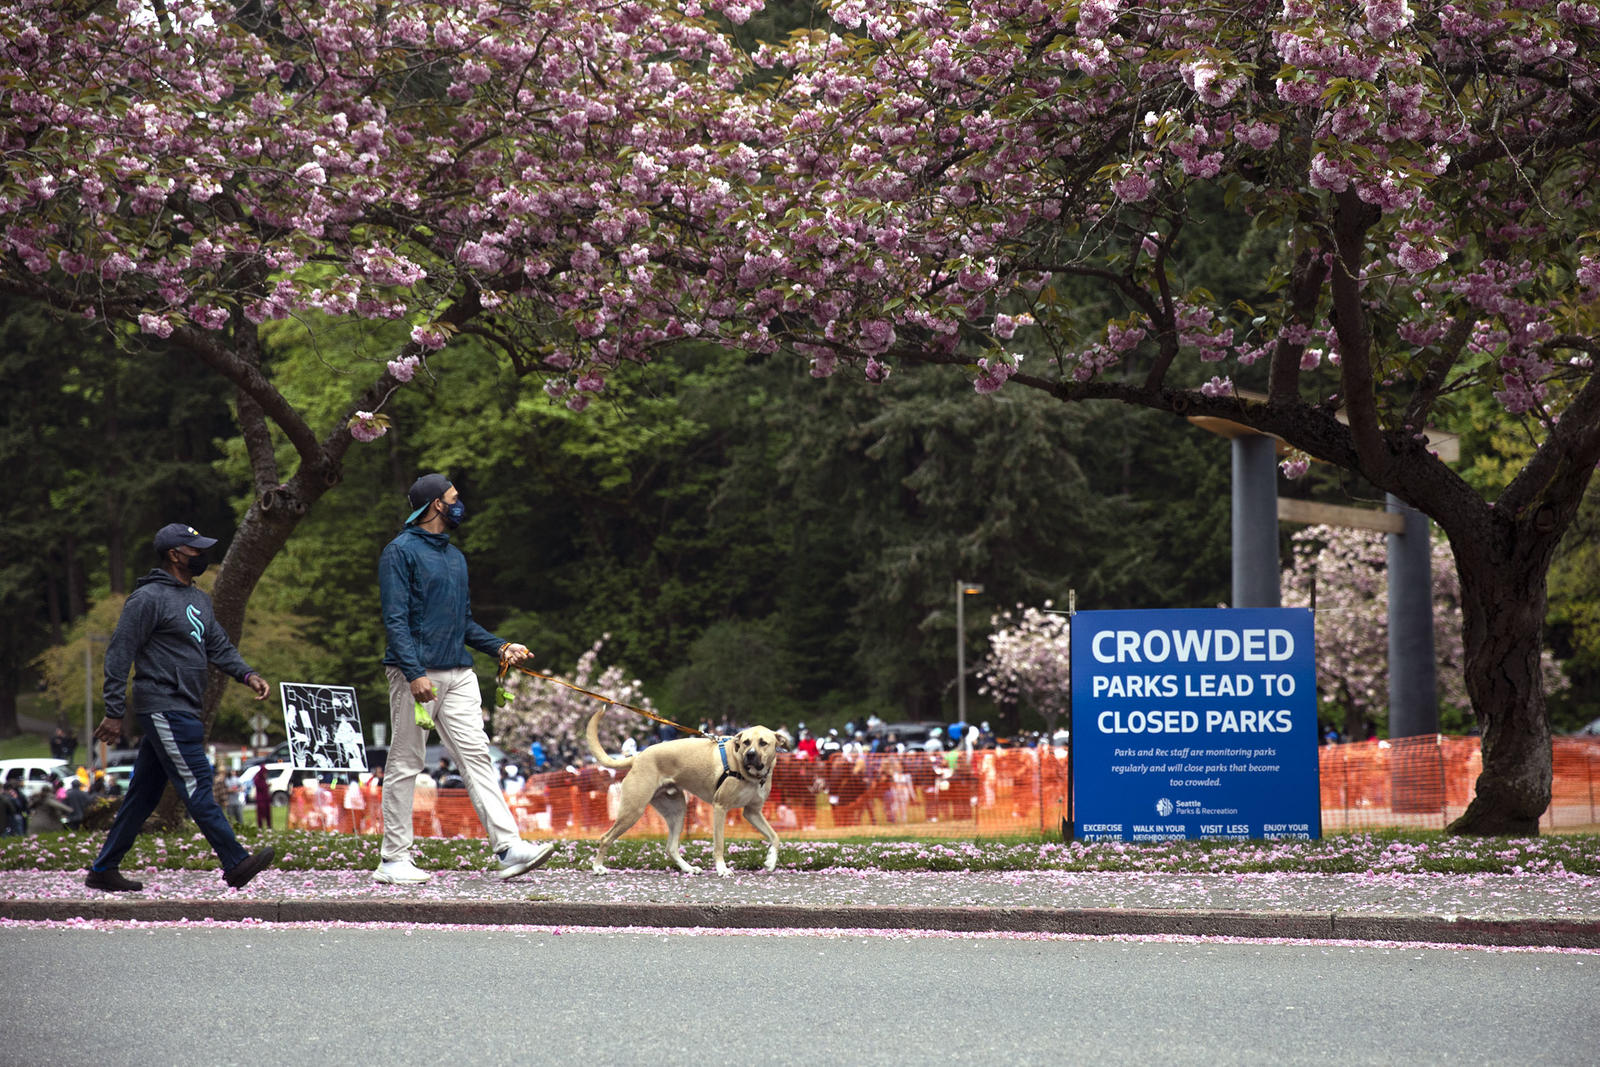 People walking around a park as magnolia blossoms fall. A sign staked in the grass reads "Crowded parks lead to closed parks."